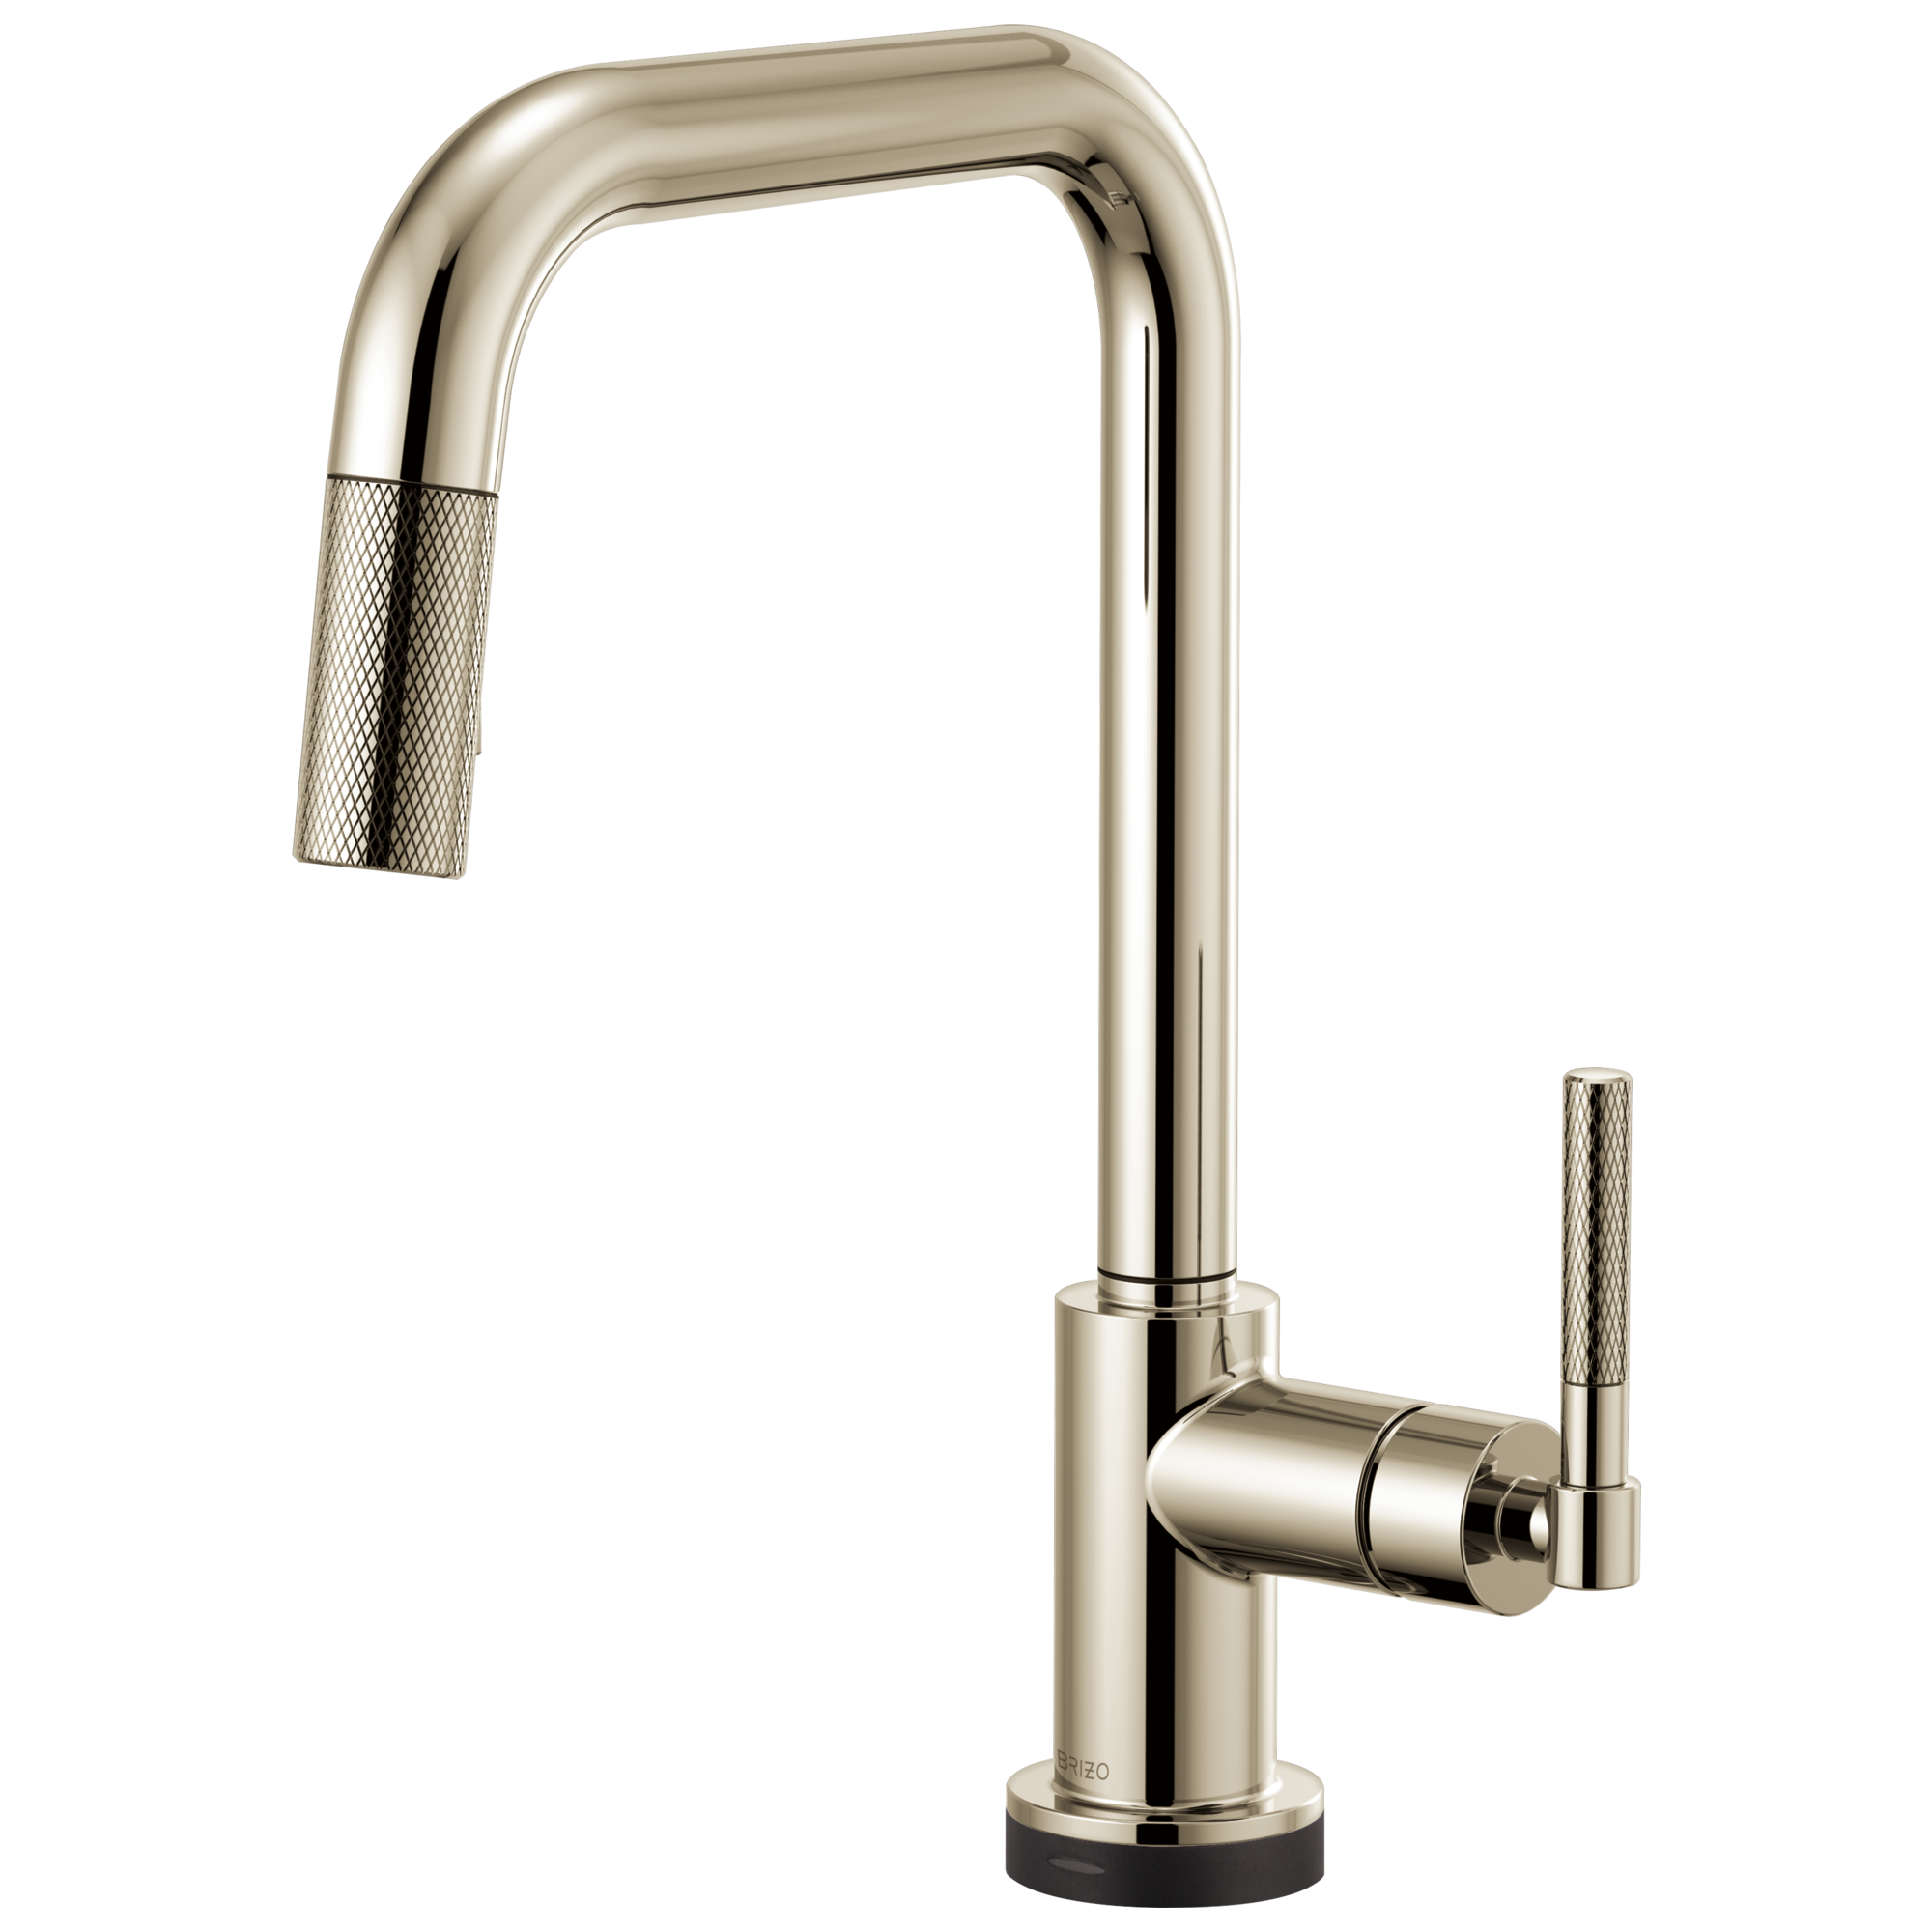 Brizo Litze Smart Touch Pull-Down Kitchen Faucet with Square Spout and Knurled Handle